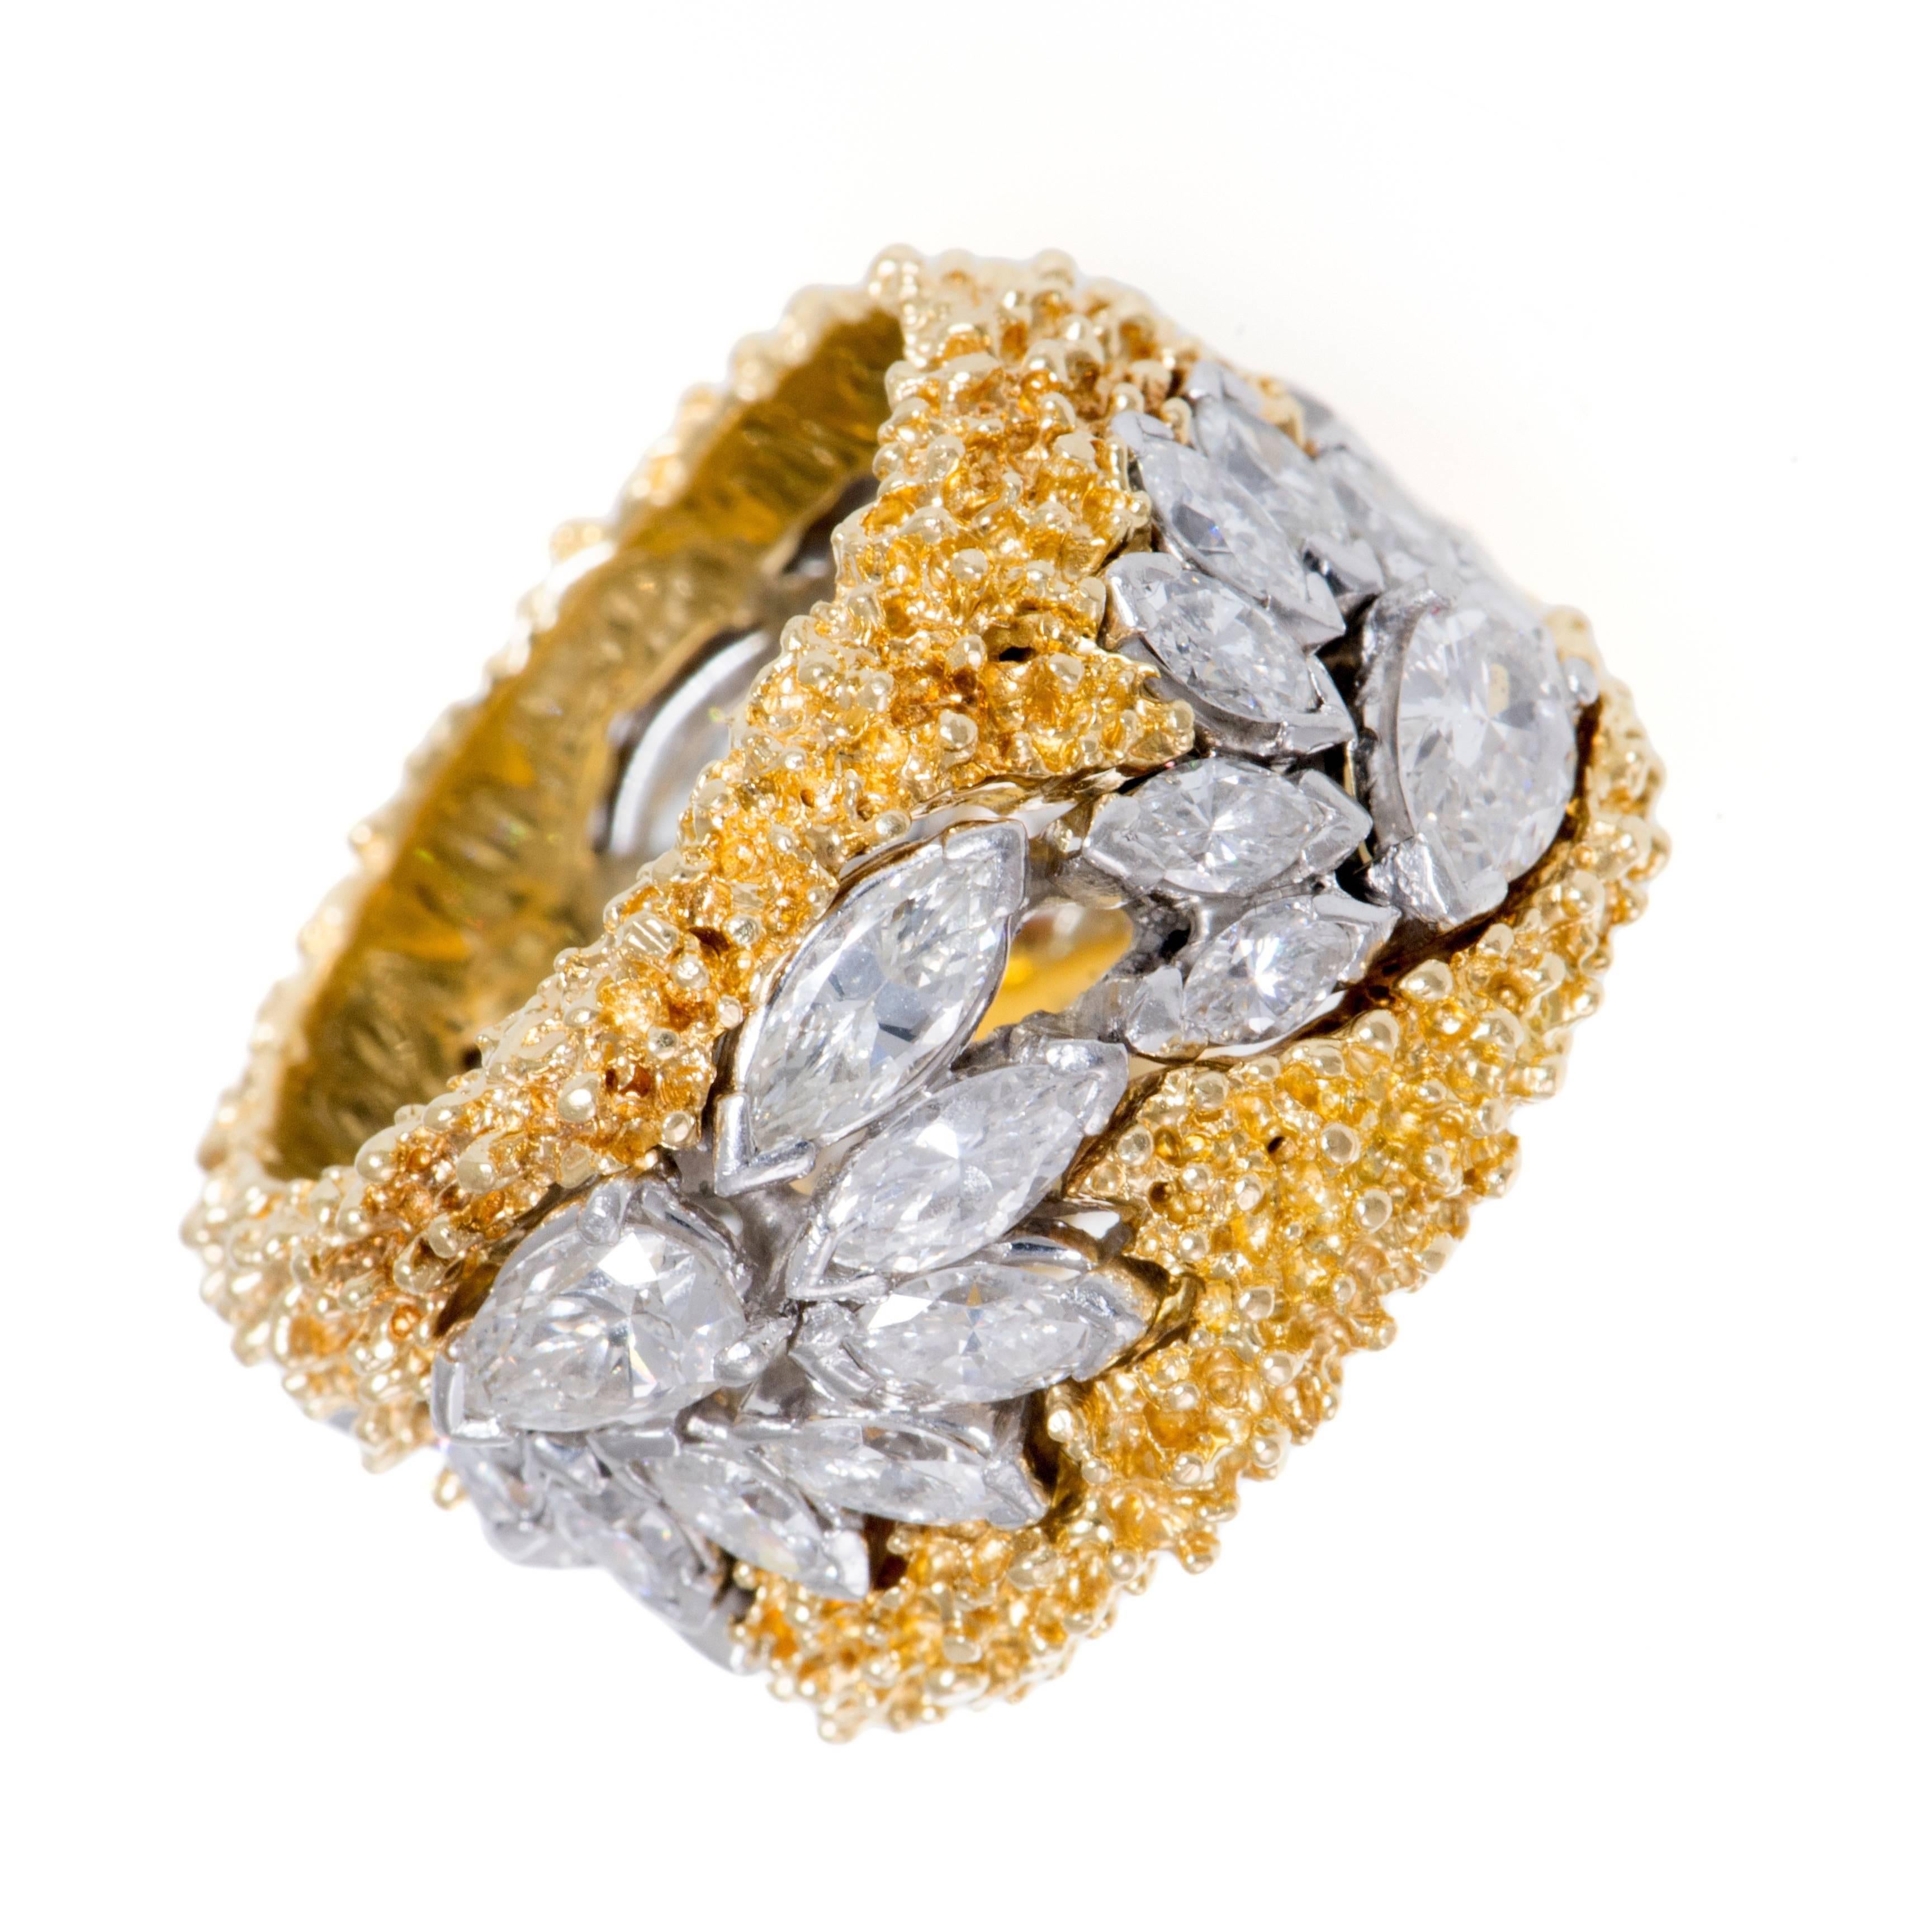 5.5 carats of marquise and pear cut diamonds, set in platinum, fan around the circumference of this handmade heavy 18 karat textured gold ring. The band is a size 7.
